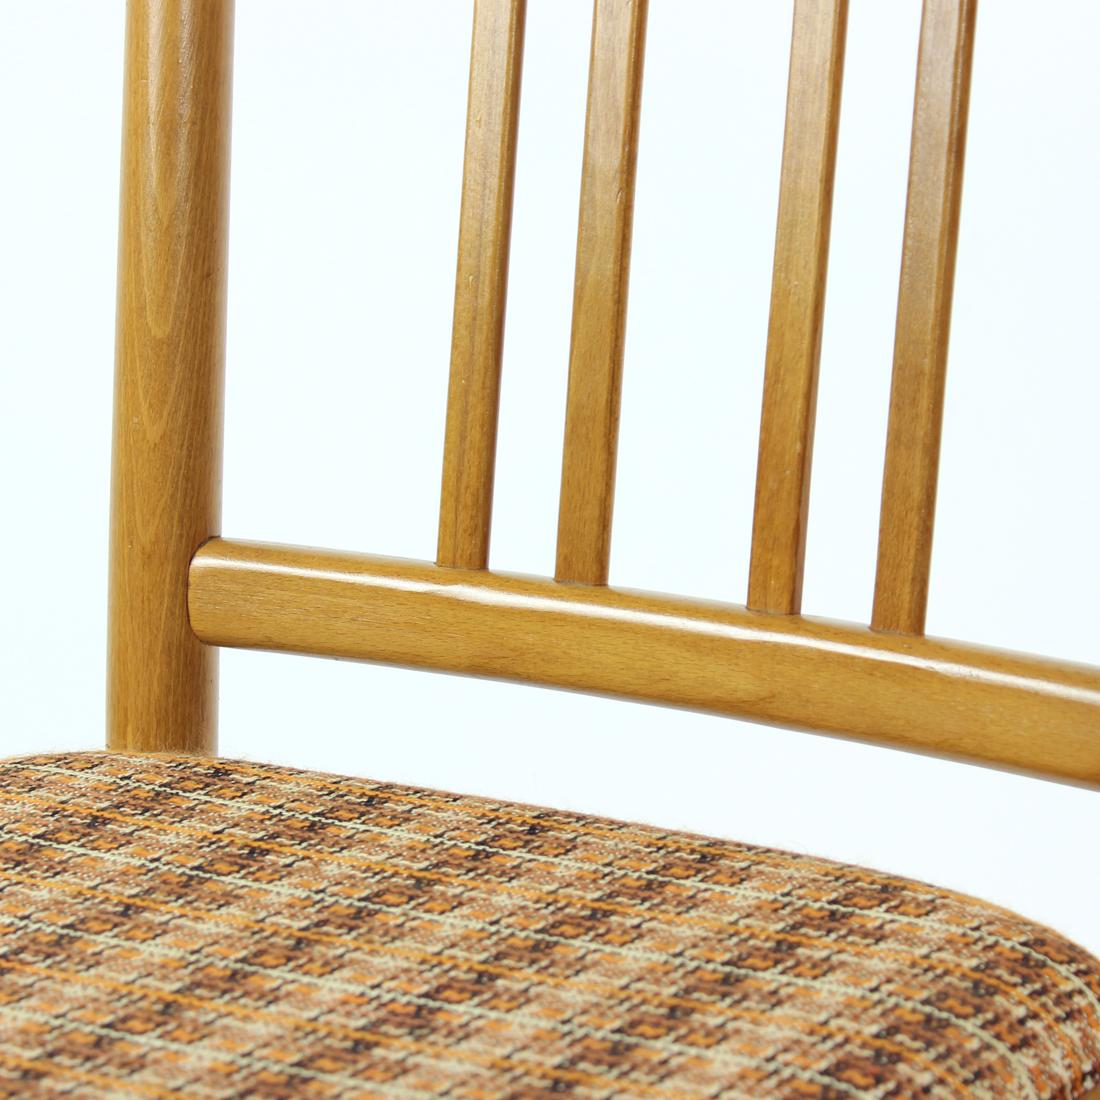 Midcentury Dining Chairs In Oak And Fabric, Ton Czechoslovakia, Set Of 4 For Sale 2